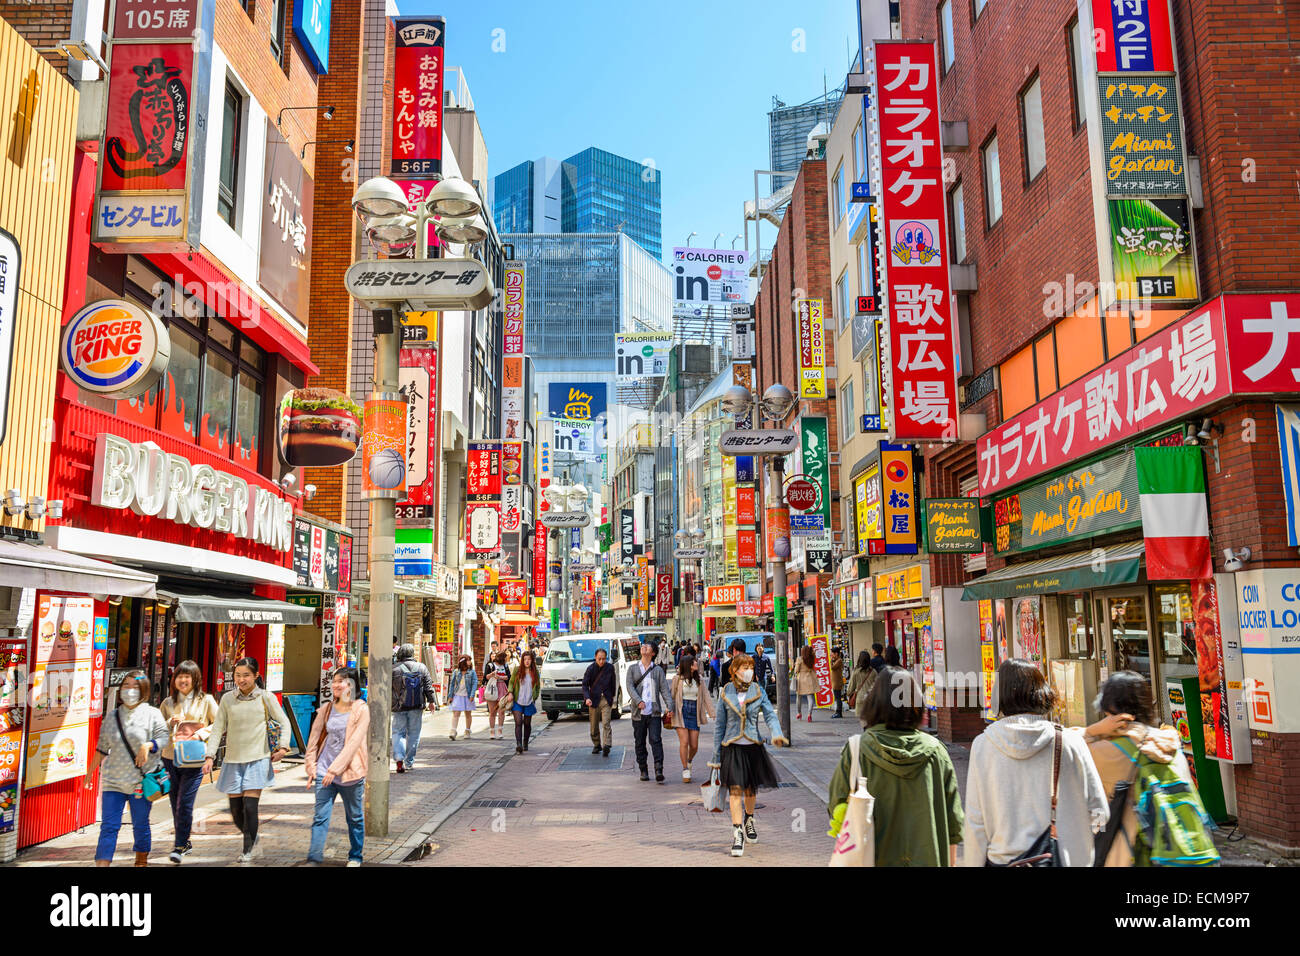 Shoppers in Shibuya, Tokyo. The area is a popular destination for fashion and shopping. Stock Photo